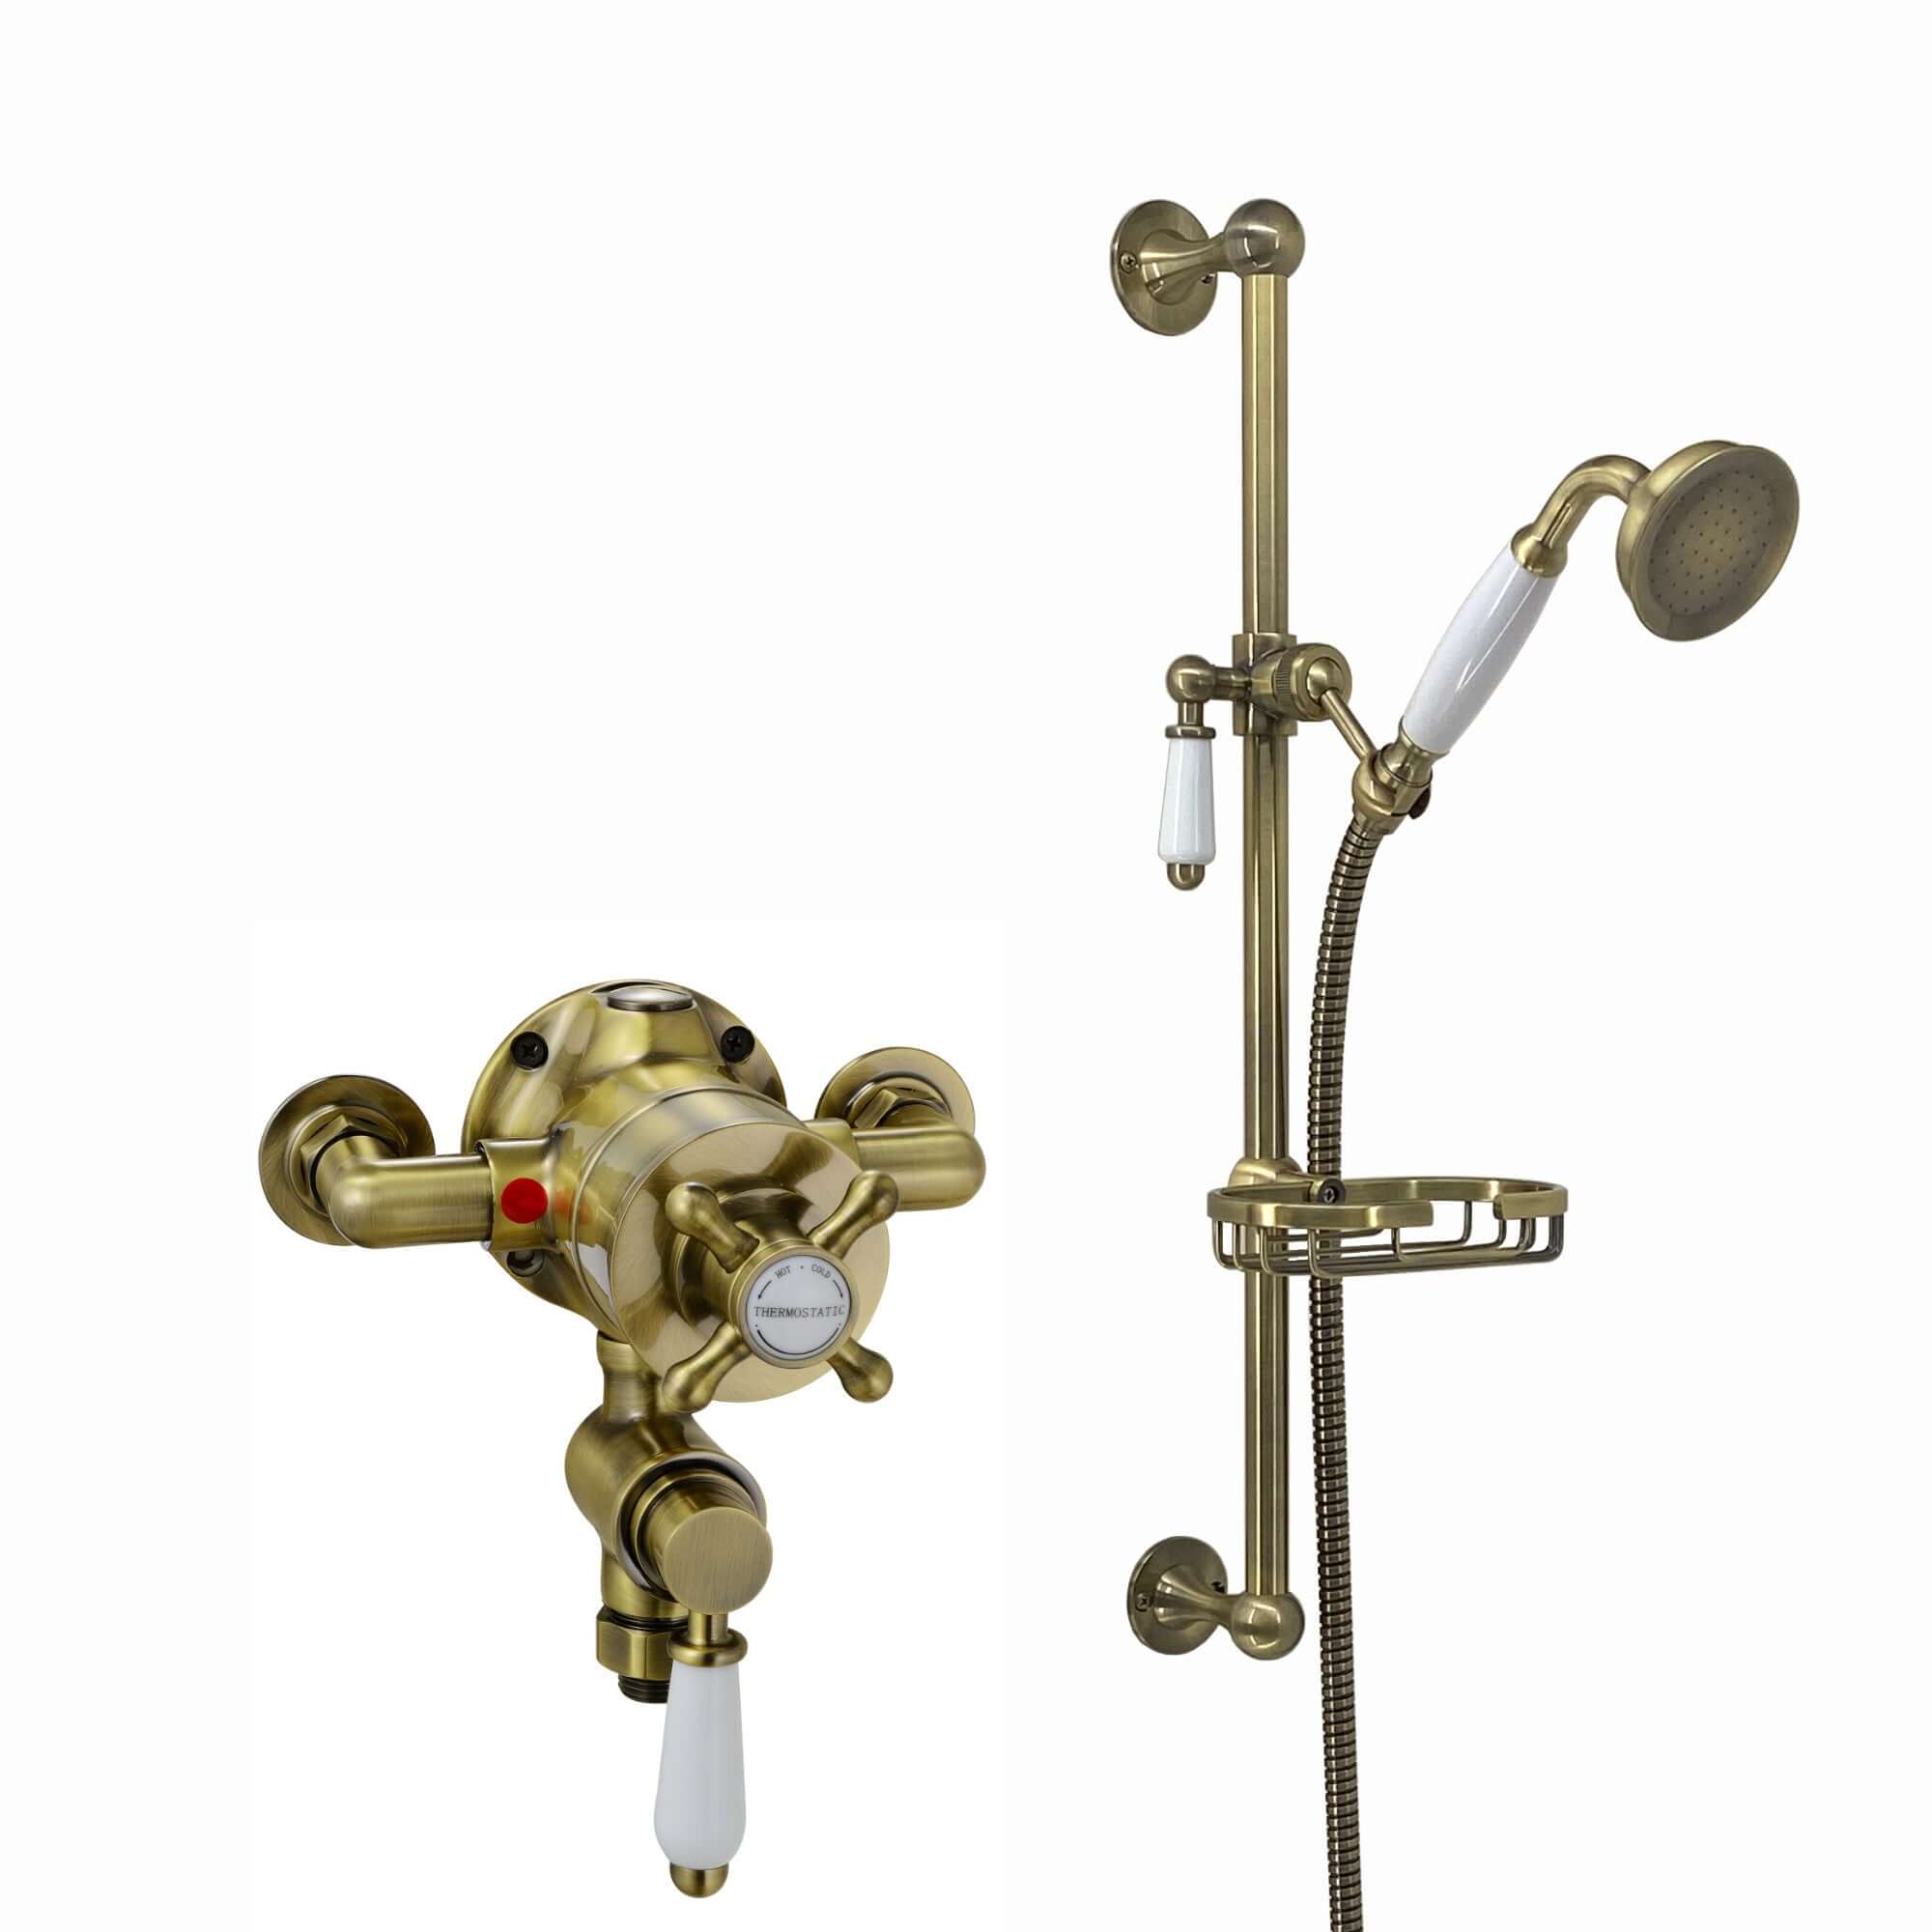 Downton Exposed Traditional Thermostatic Shower Set Incl. Twin Shower Valve And Slider Rail Kit, Soap Holder - Antique Bronze And White - Showers